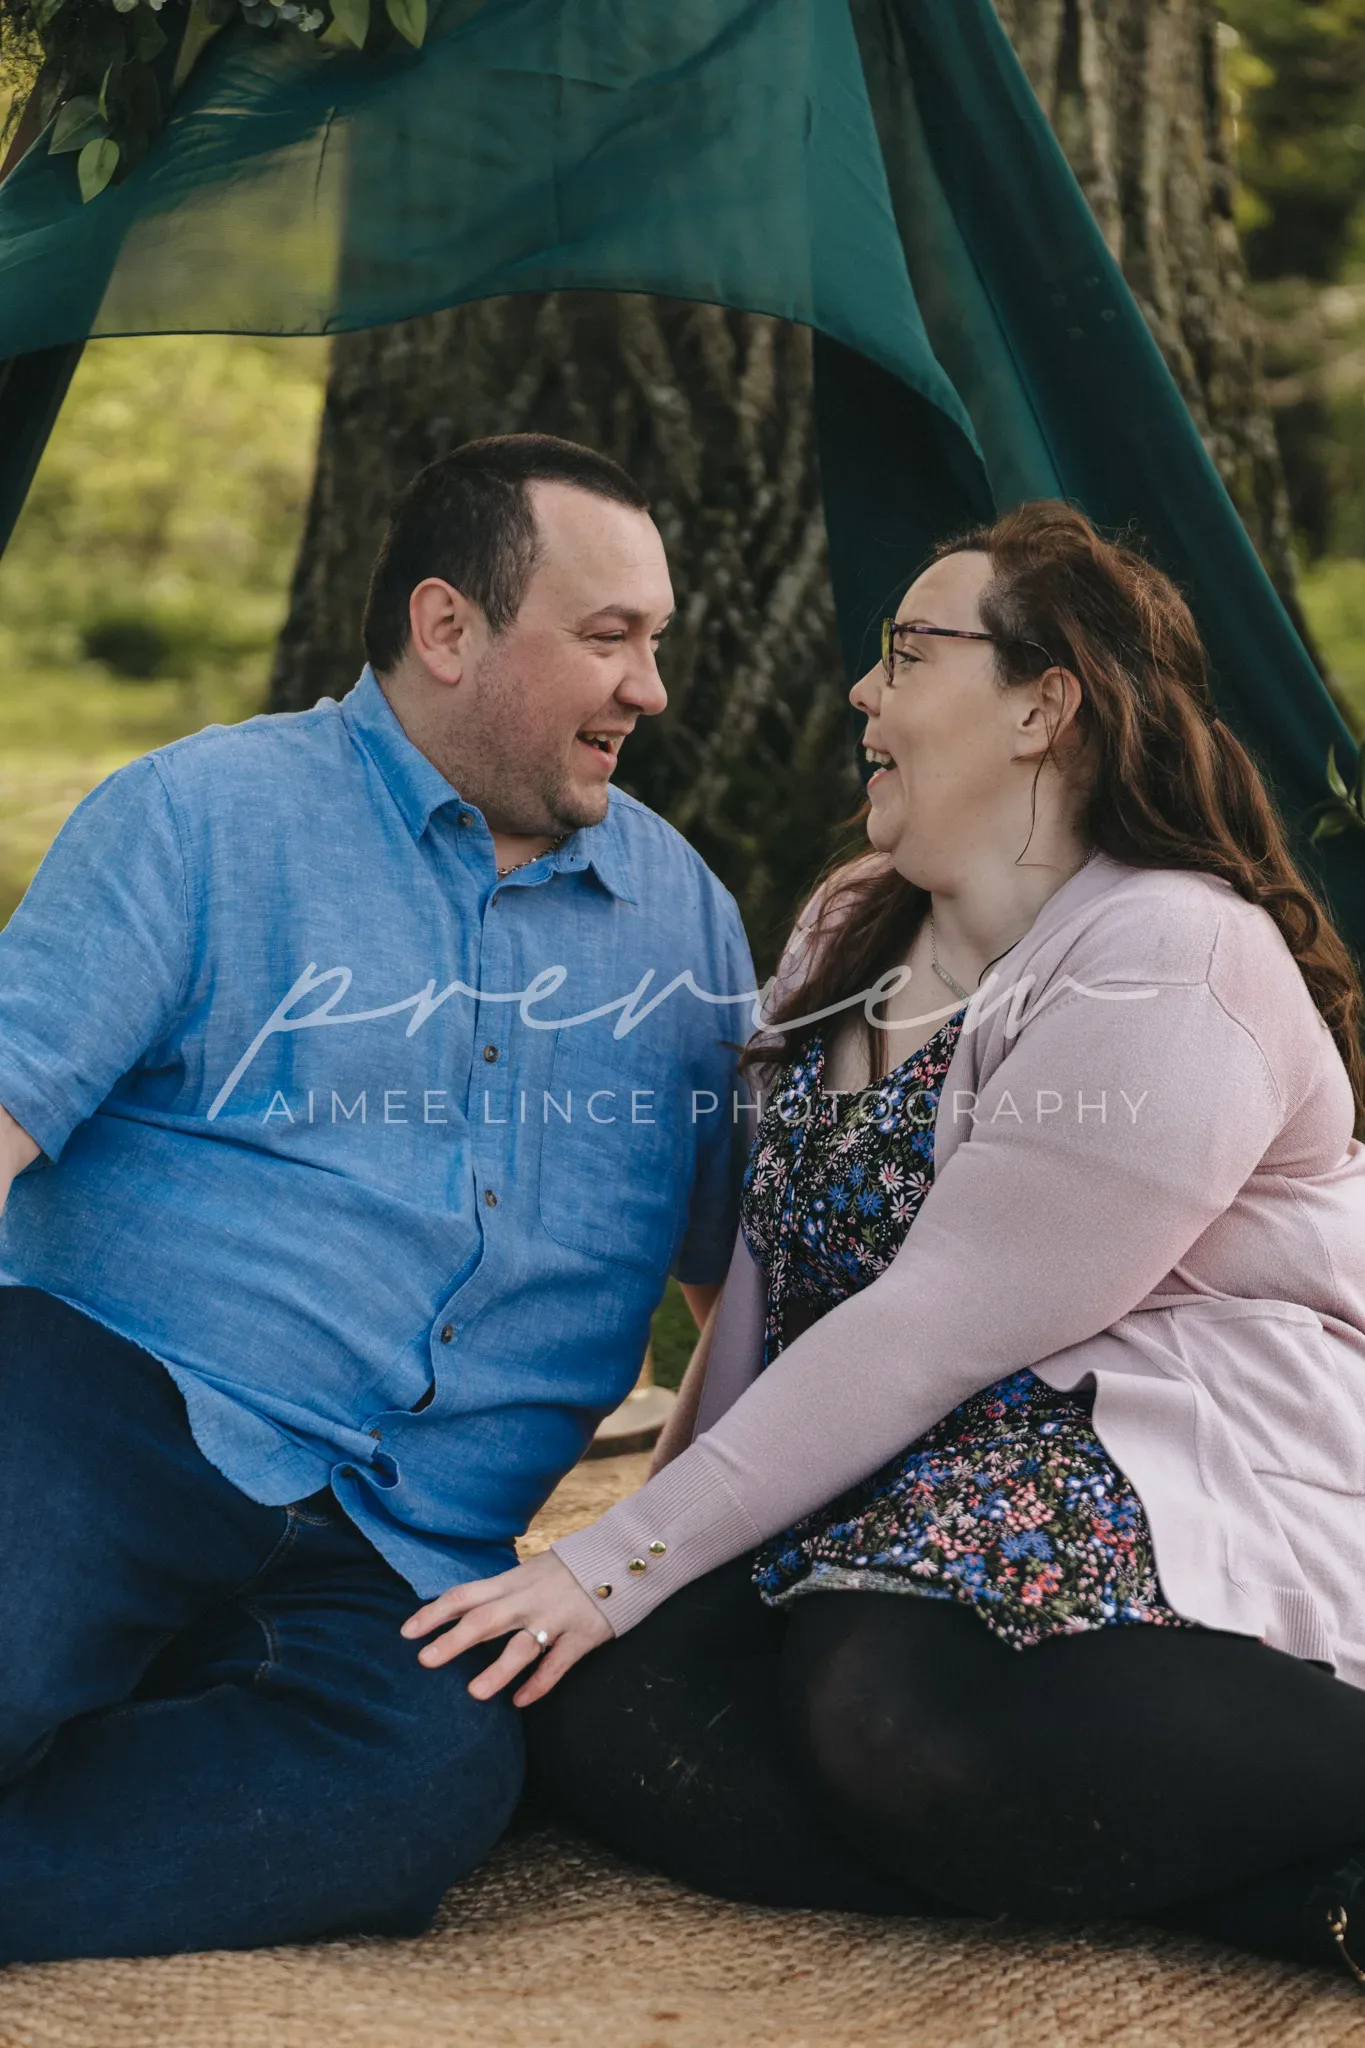 A man and a woman, Ashley and Samantha, sit on a blanket, smiling joyfully at each other under a forest canopy. Both wear casual outfits; the man in a blue shirt and Ashley in